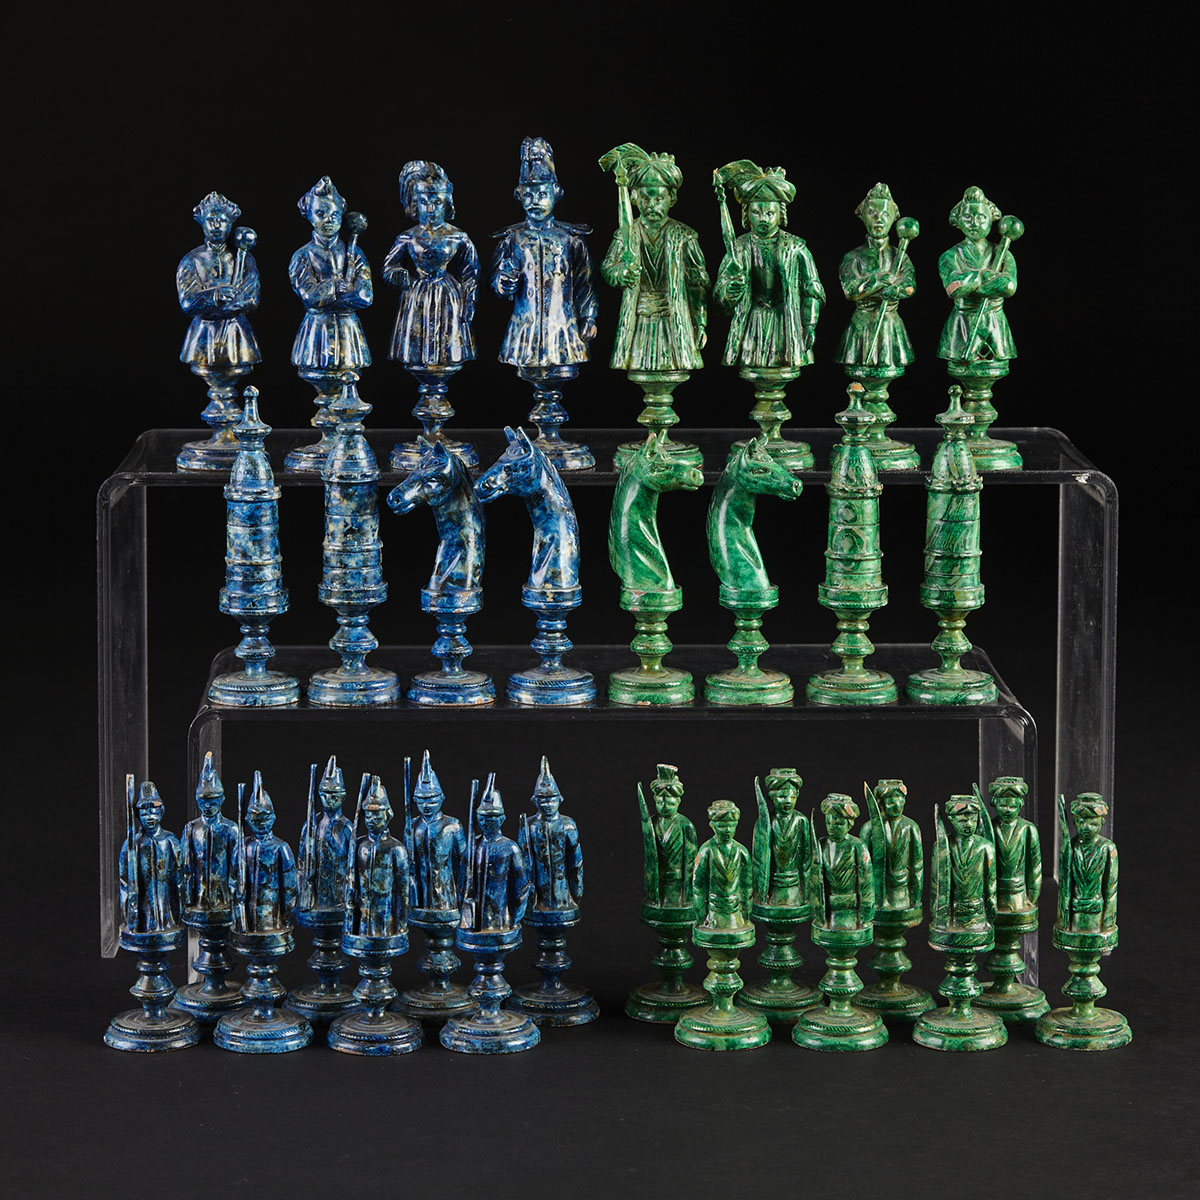 South German Carved and Lacquered Wood ‘Europe vs. Ottoman Empire’ Figural Chess Set, 19th century